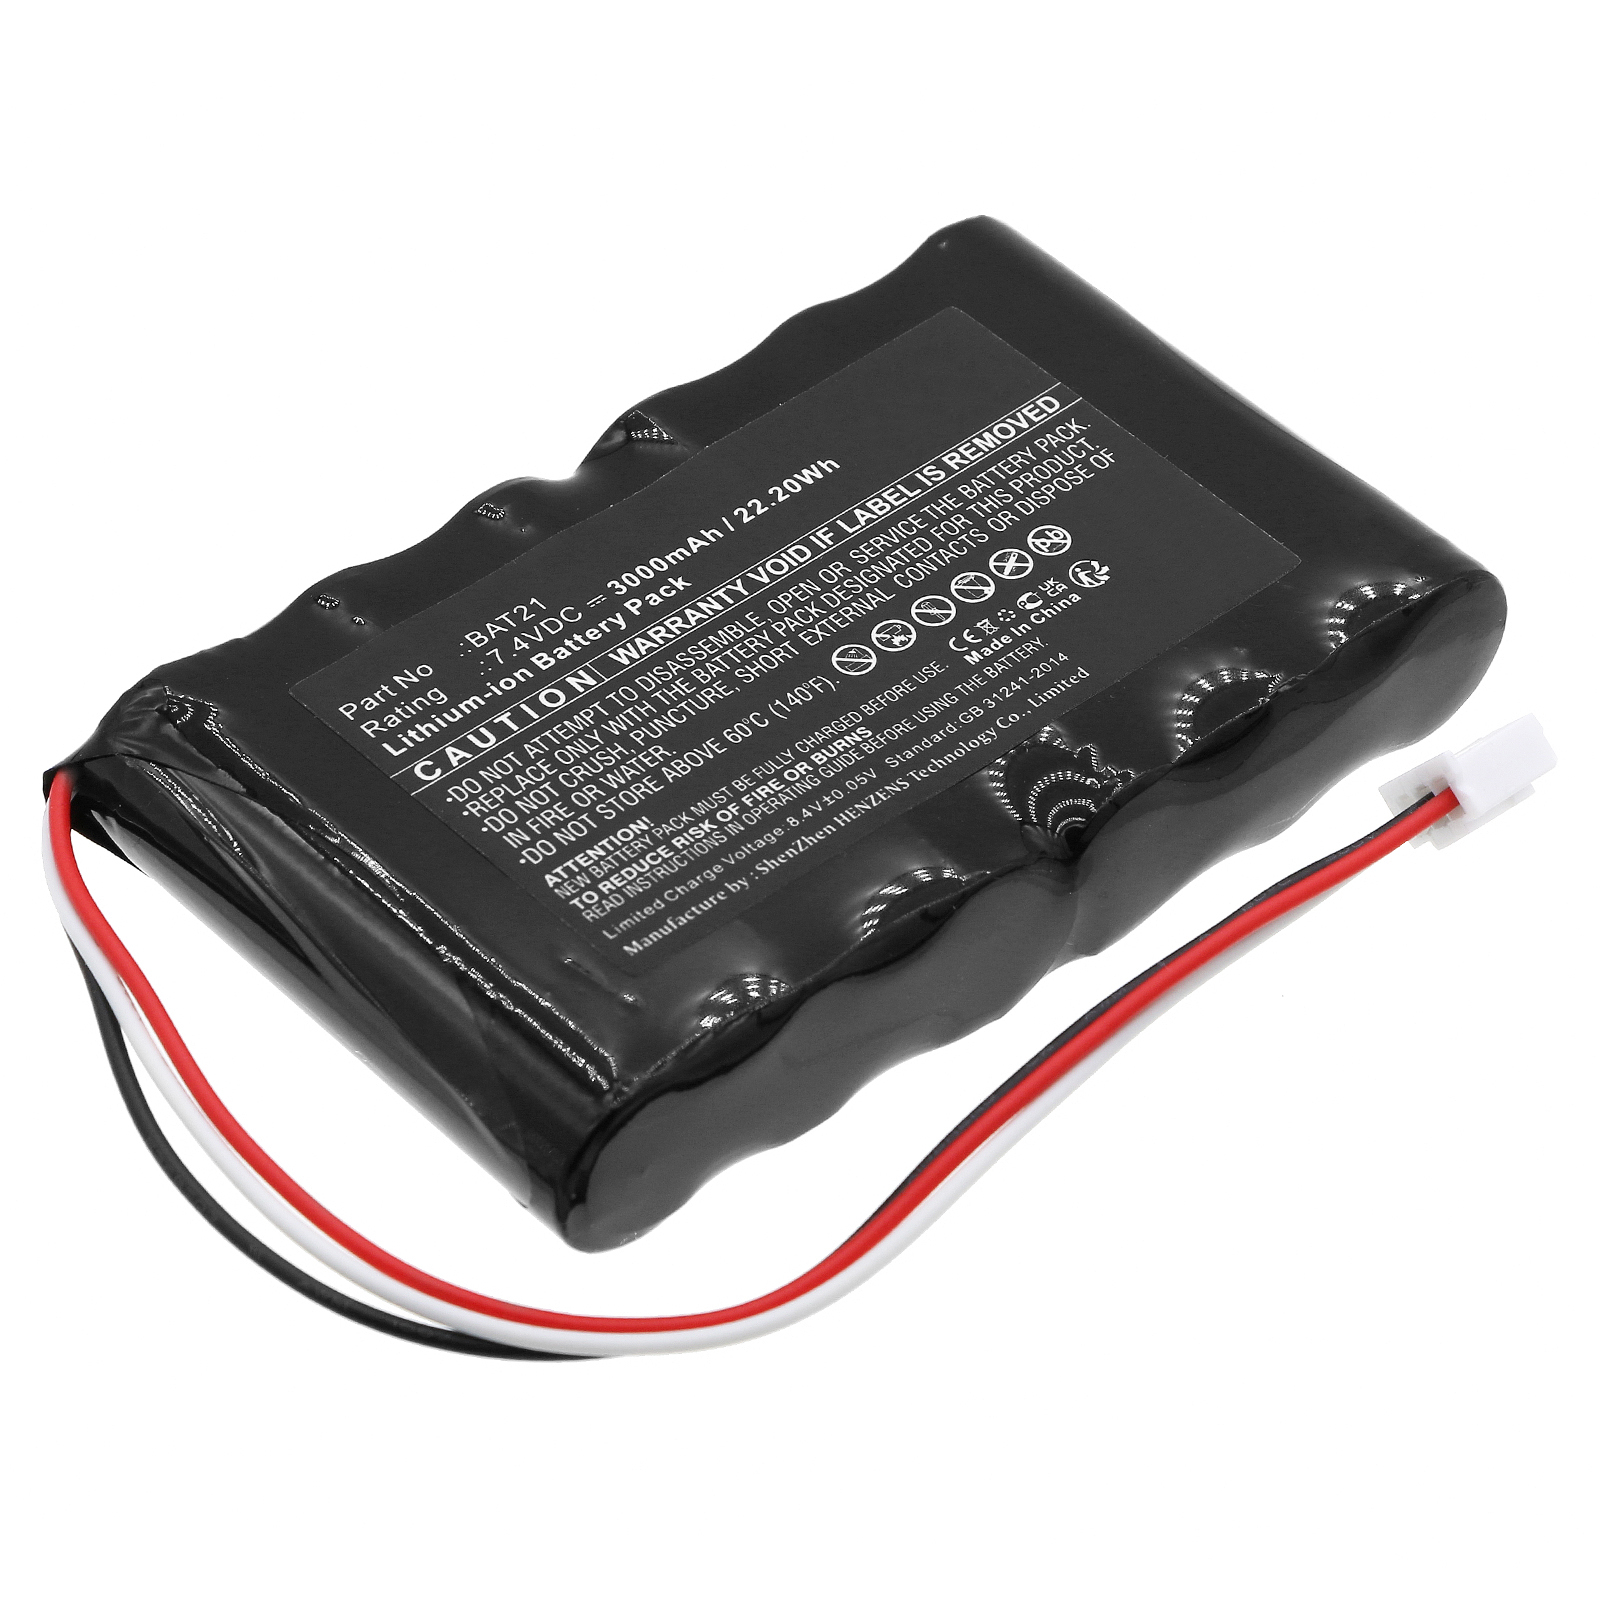 Batteries for ADEMedical